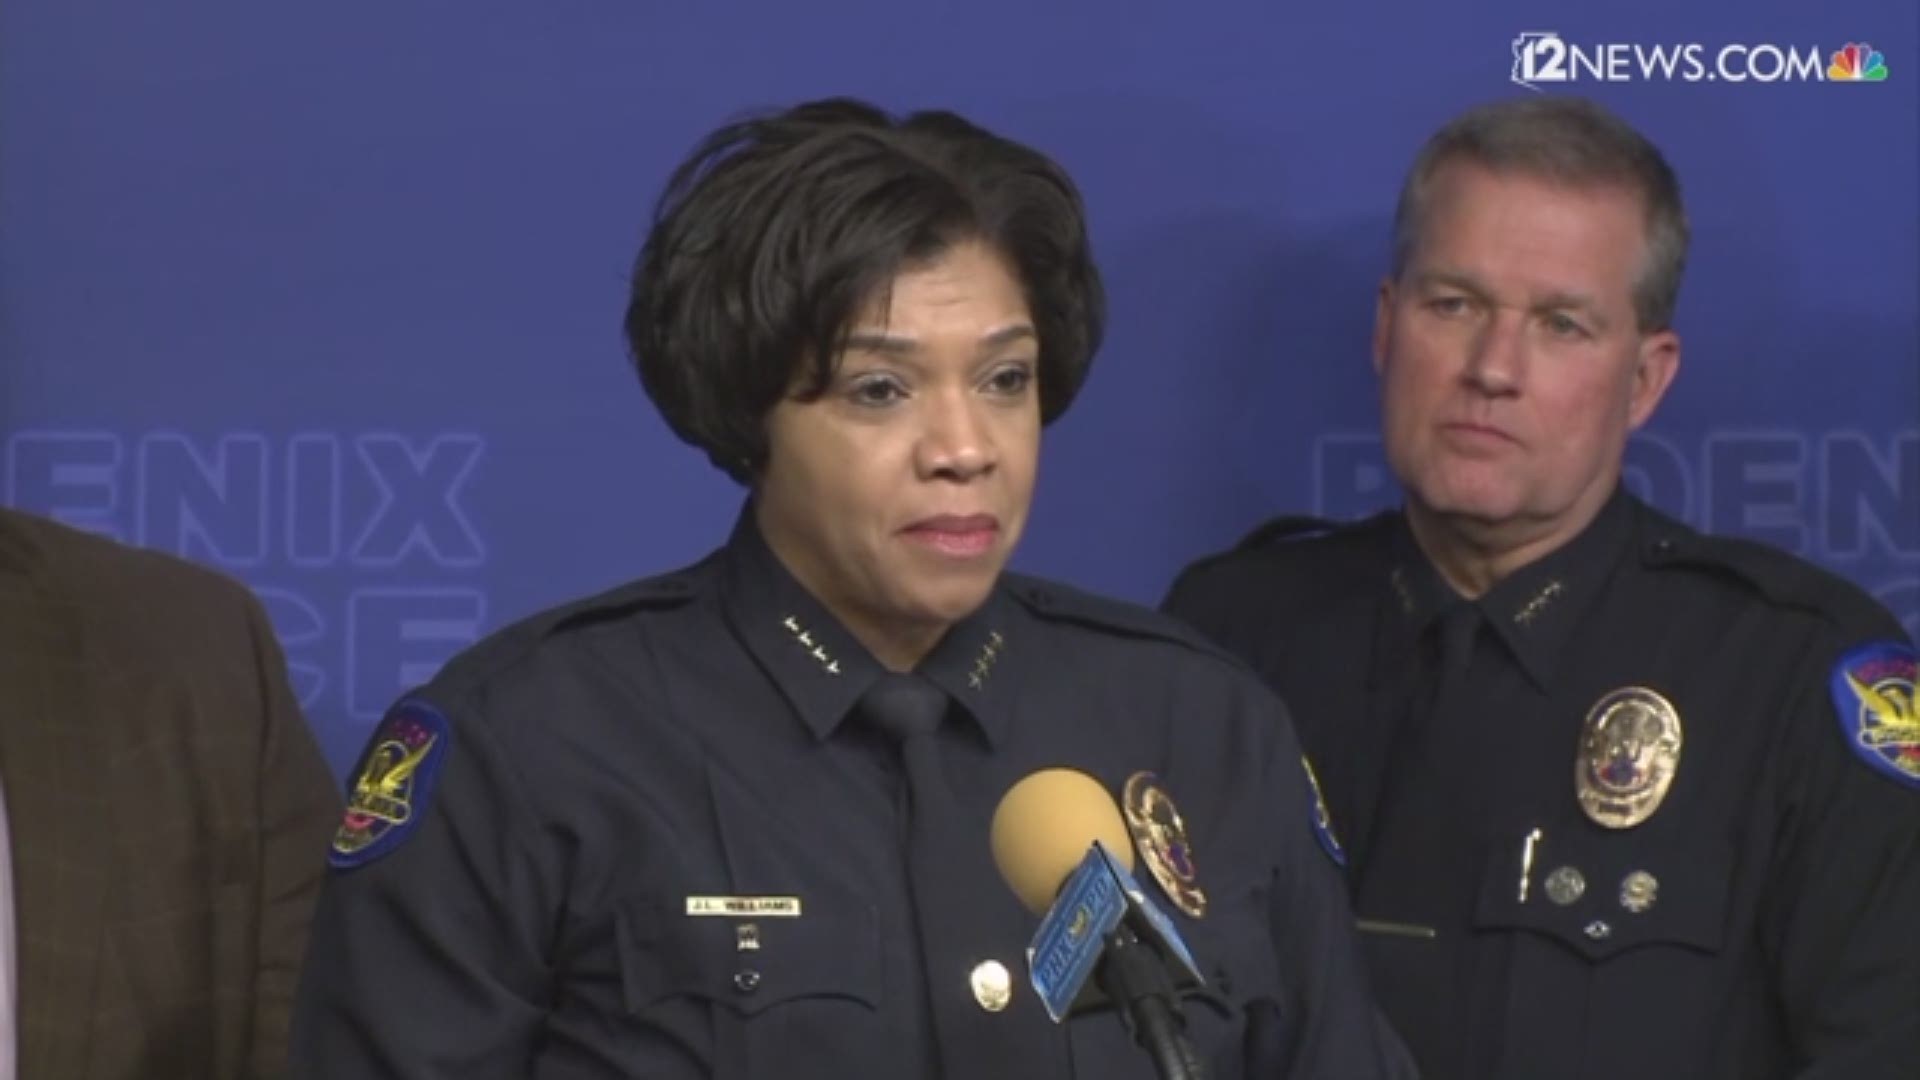 Phoenix Police Chief Jeri Williams said the suspect was arrested on one count of sexual assault and one count of vulnerable adult abuse. The investigation into the assault took place after a patient with significant intellectual disabilities gave birth in December.